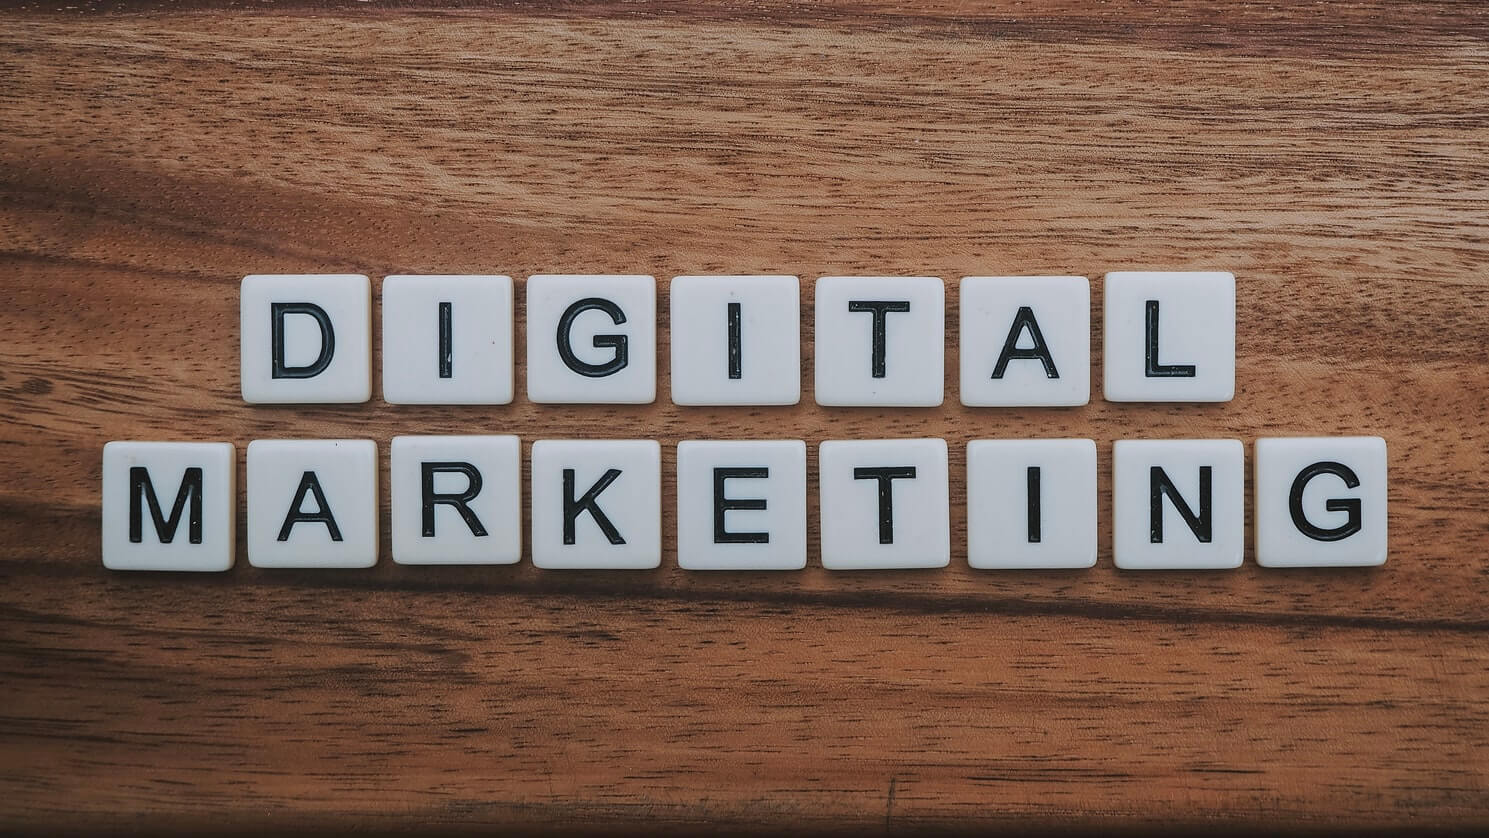 Top 10 Changes in the Digital Marketing Industry That Occurred in 2020